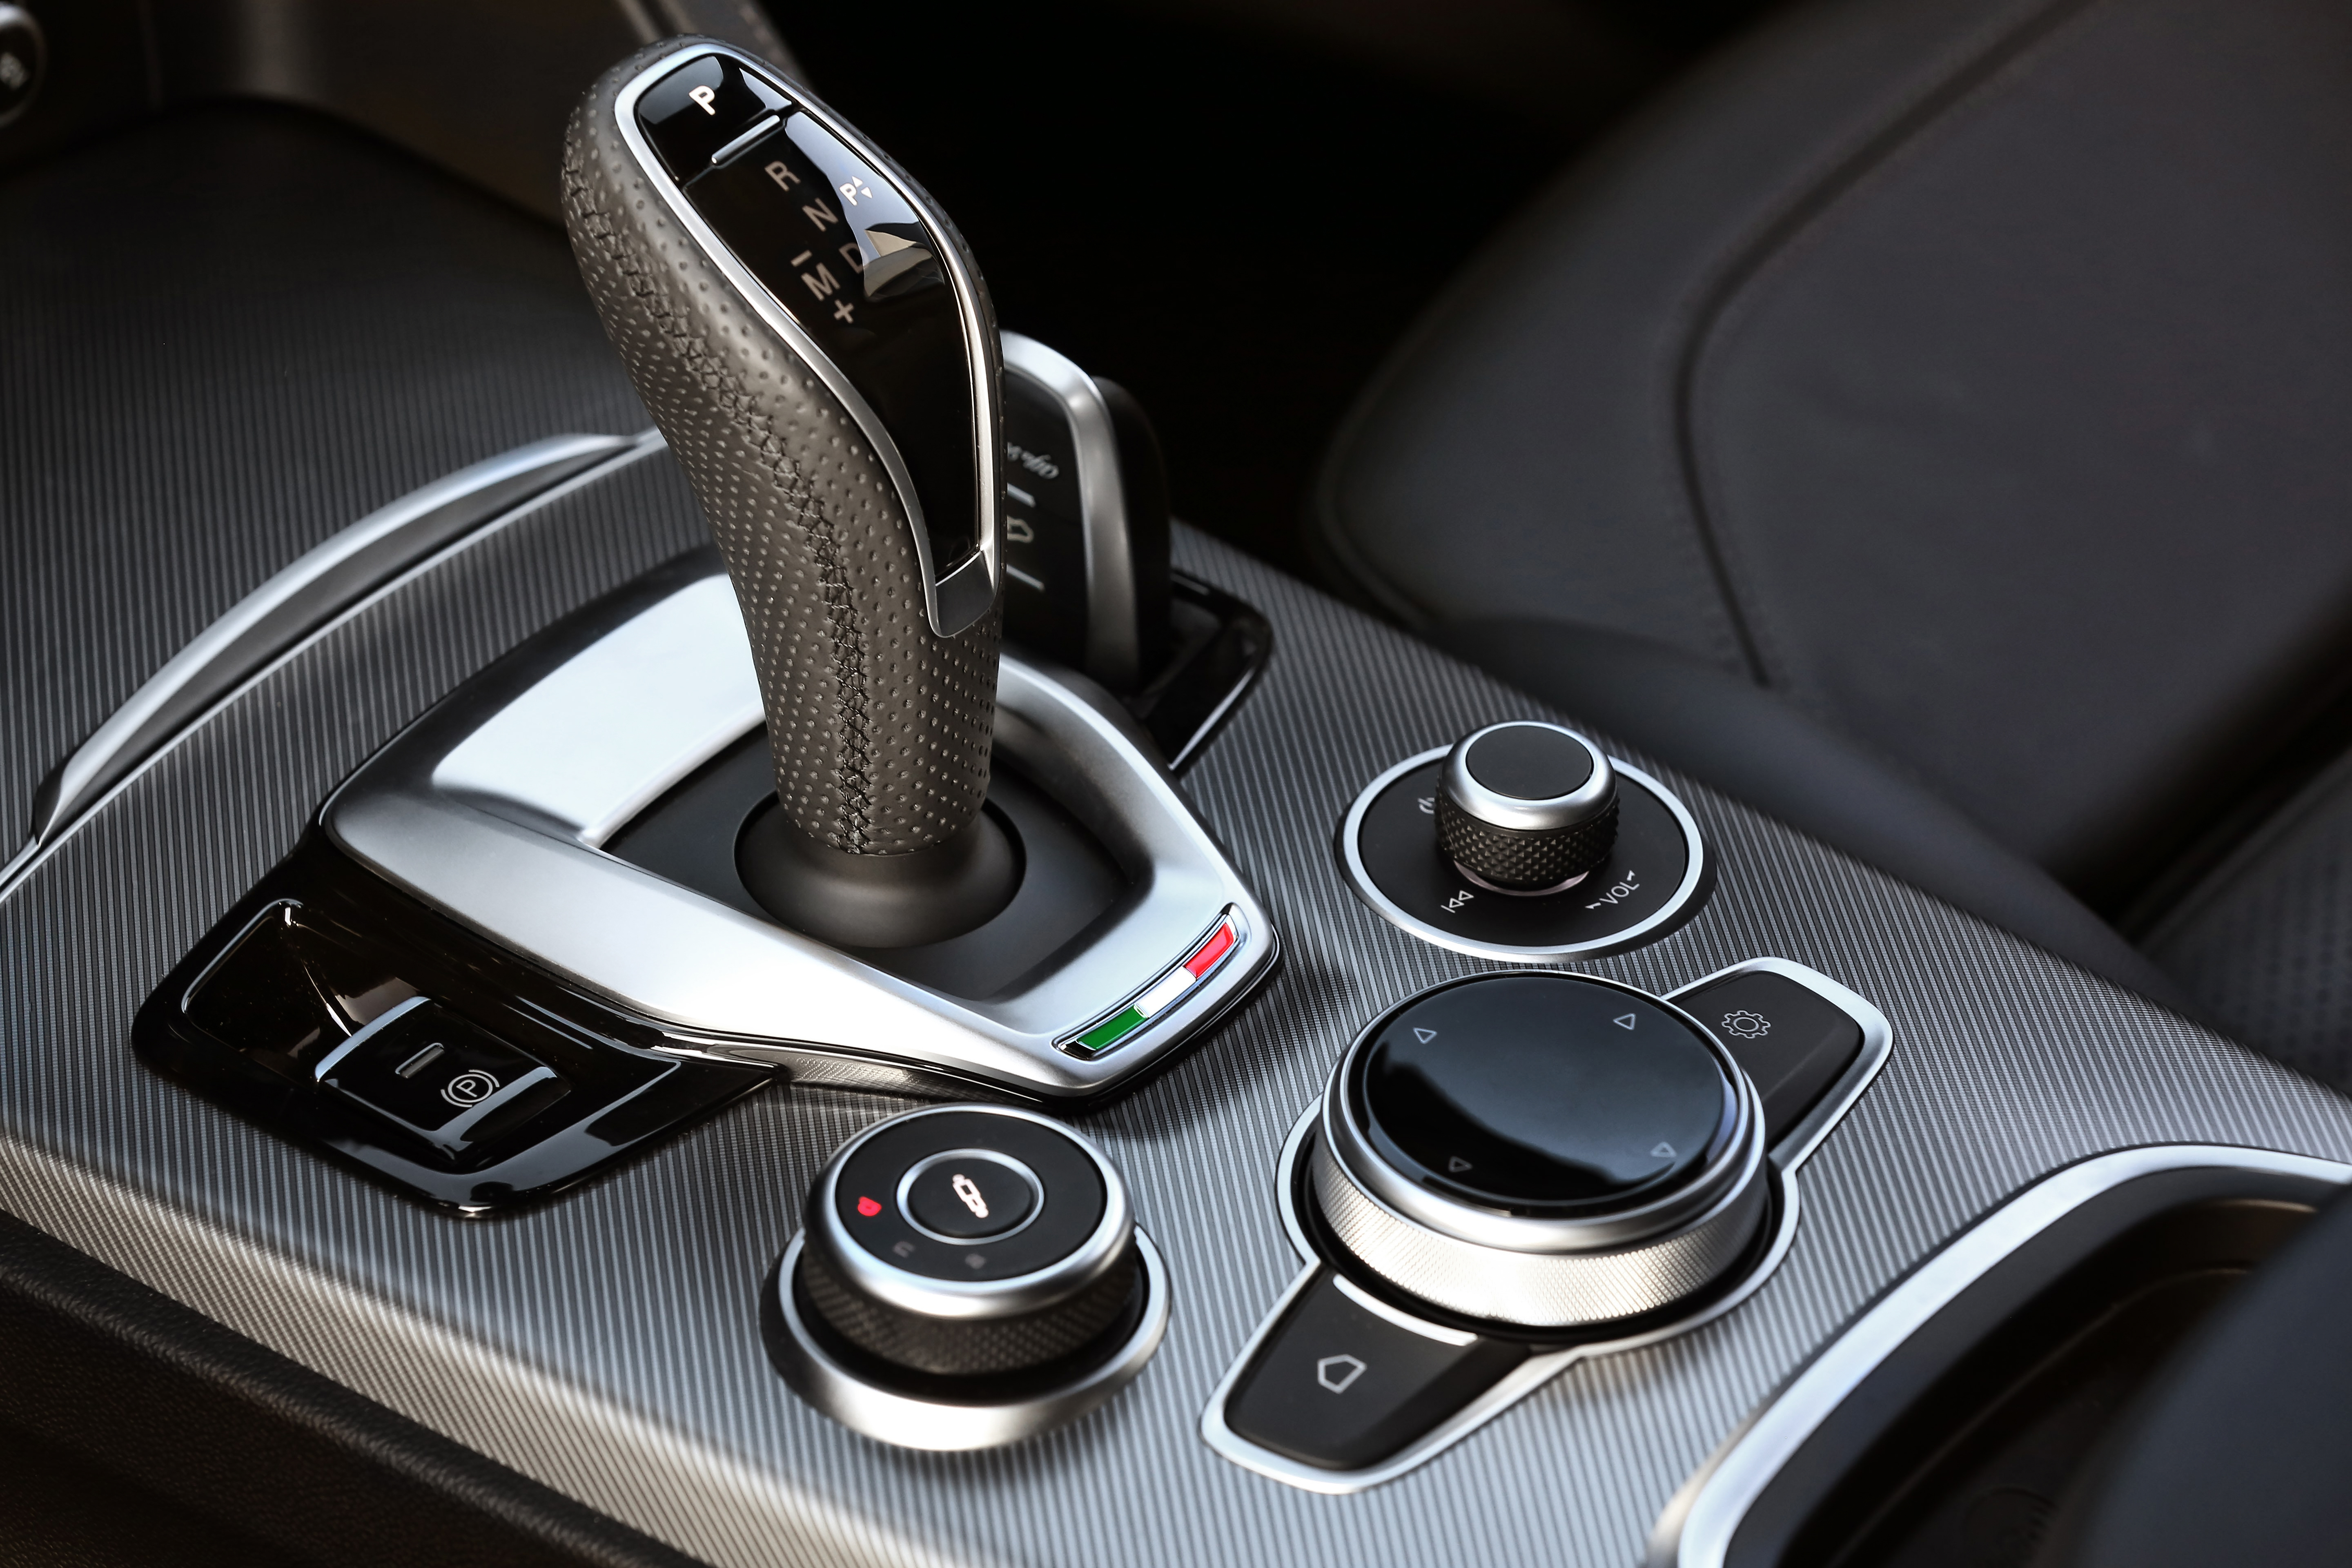 A new leather-wrapped gearstick sits in the middle